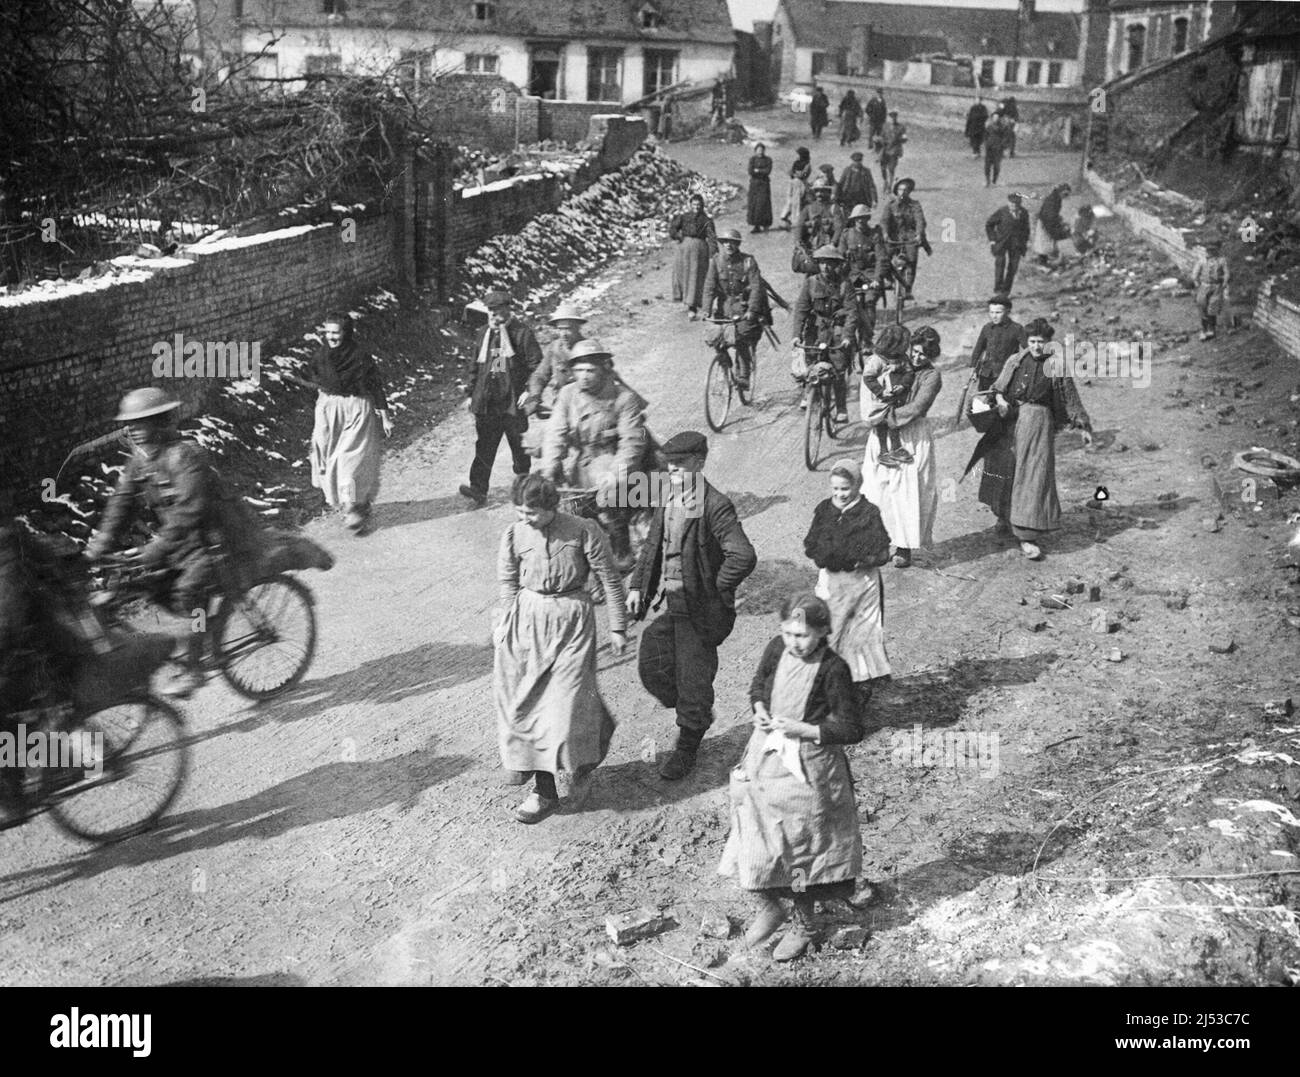 British soldiers arriving in a village in France. They are surrounded by women and children. Stock Photo